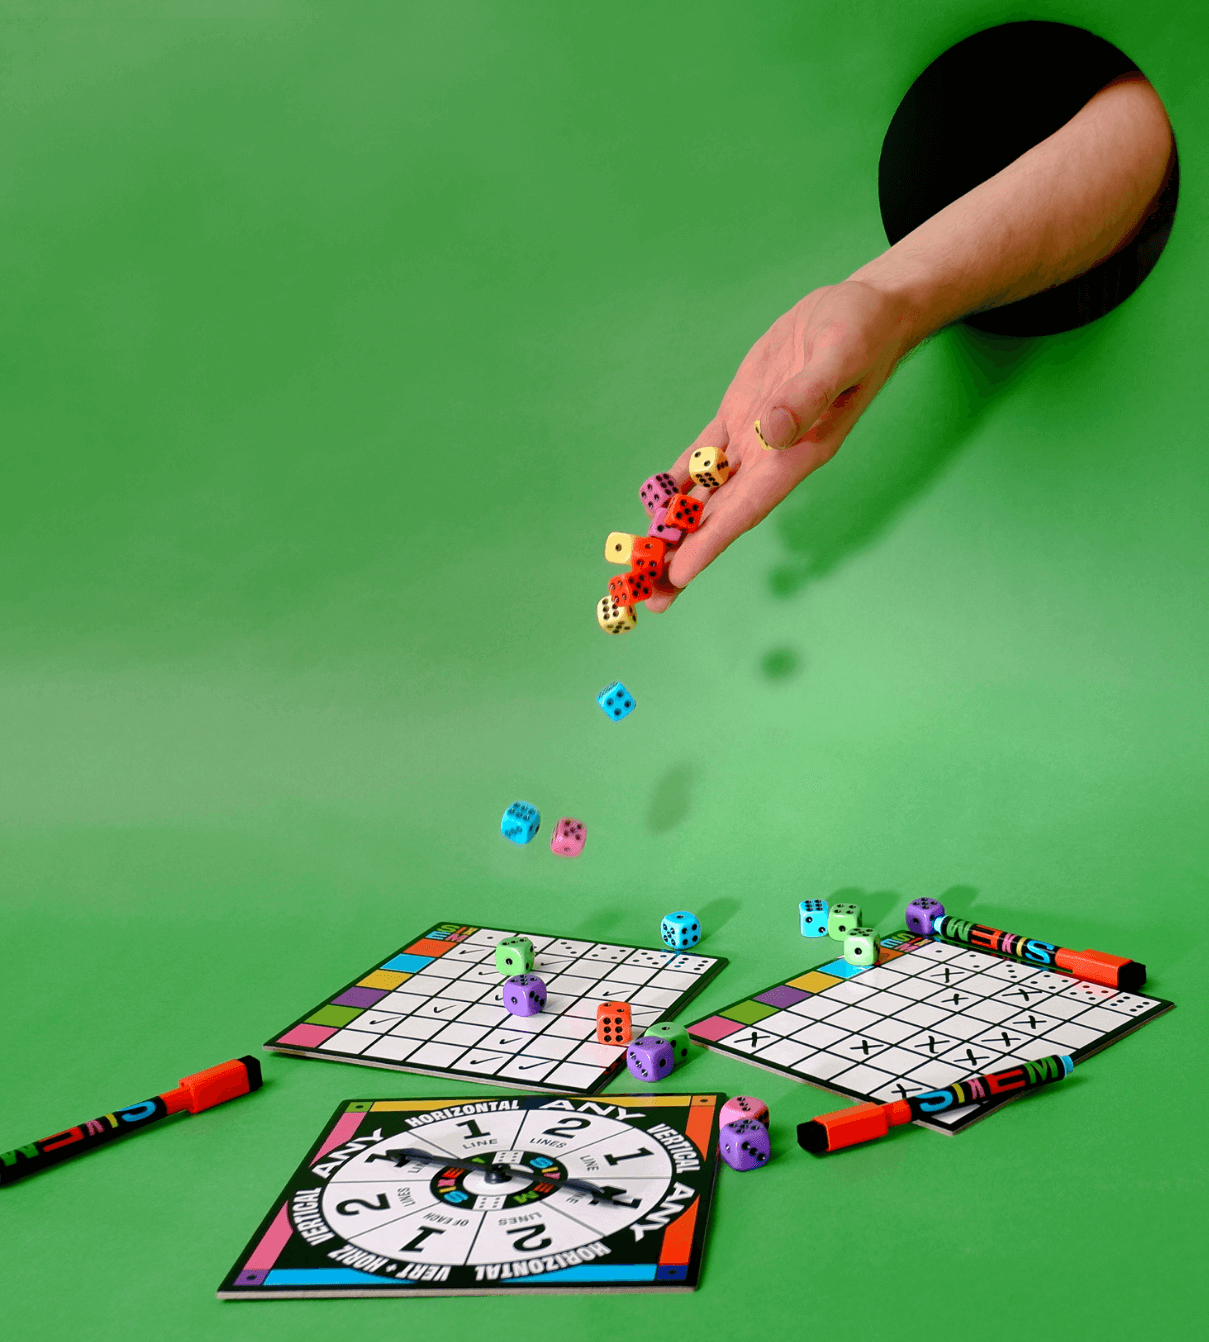 A hand sticks out from a hole in the green background and tosses dice in motion onto game pieces below